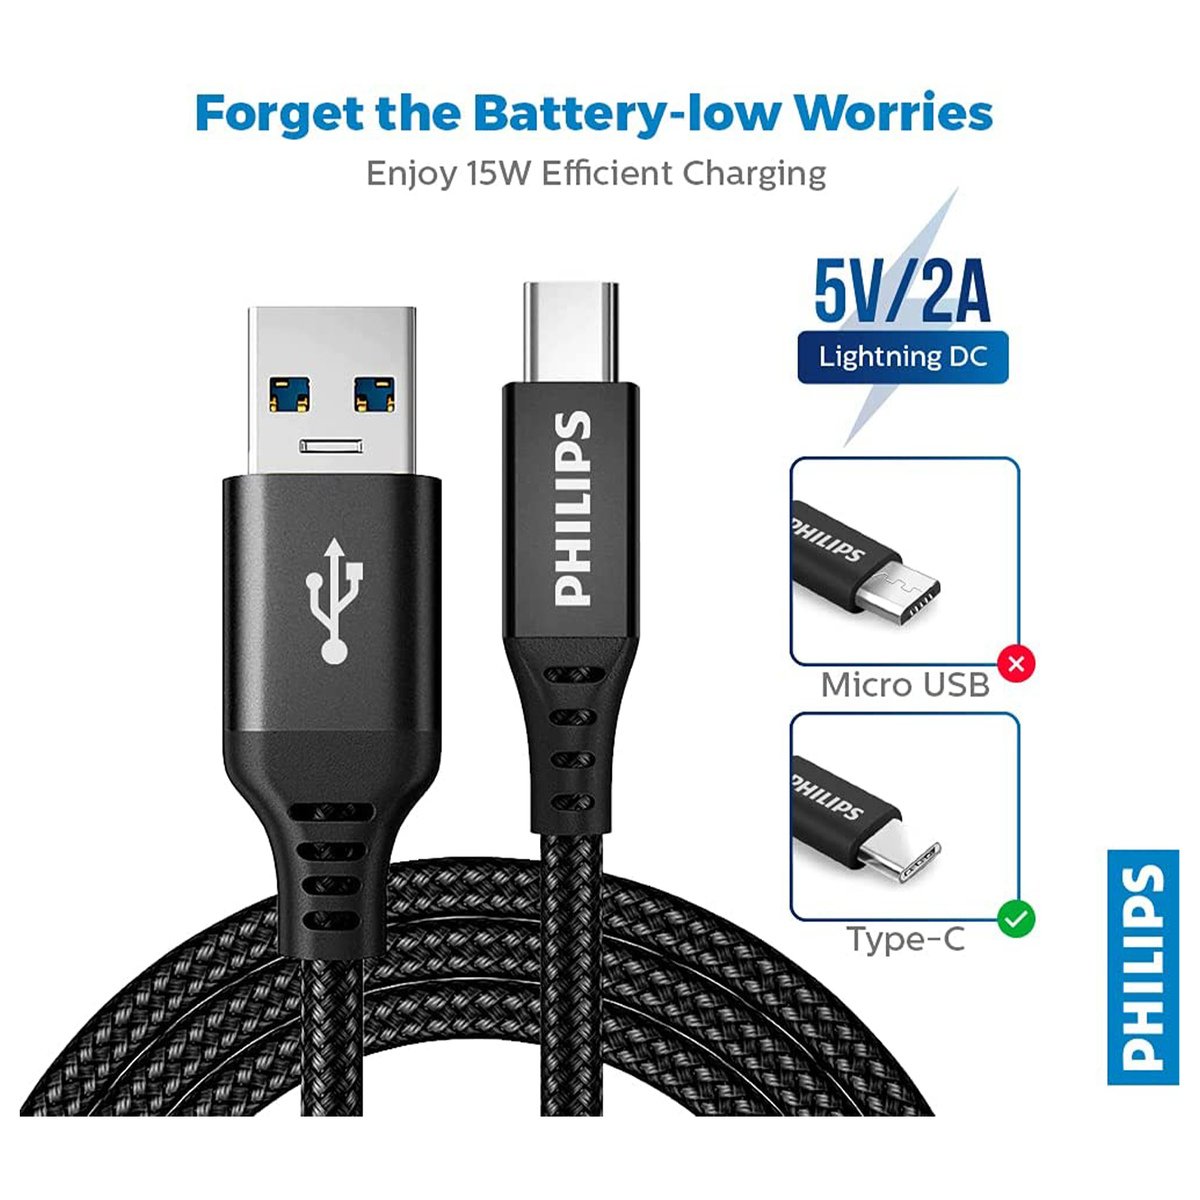 Philips USB-A to USB-C Braided Cable 2M DLC5206A/00 (Black)